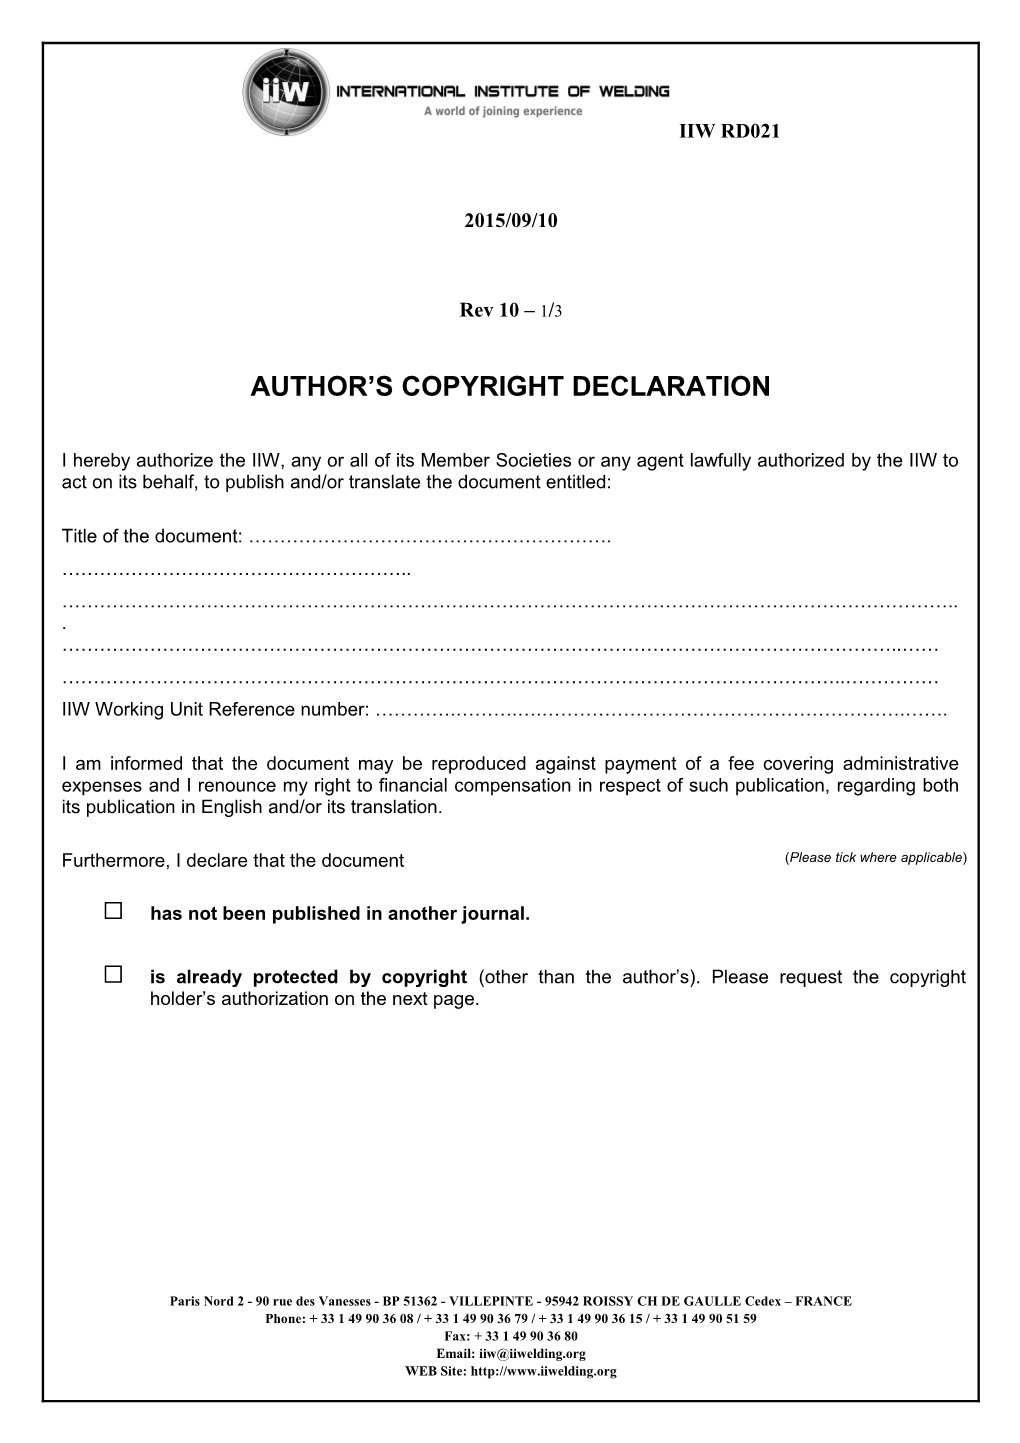 Author Copyright Declaration (Not for Use When Submitting to Peer Review)